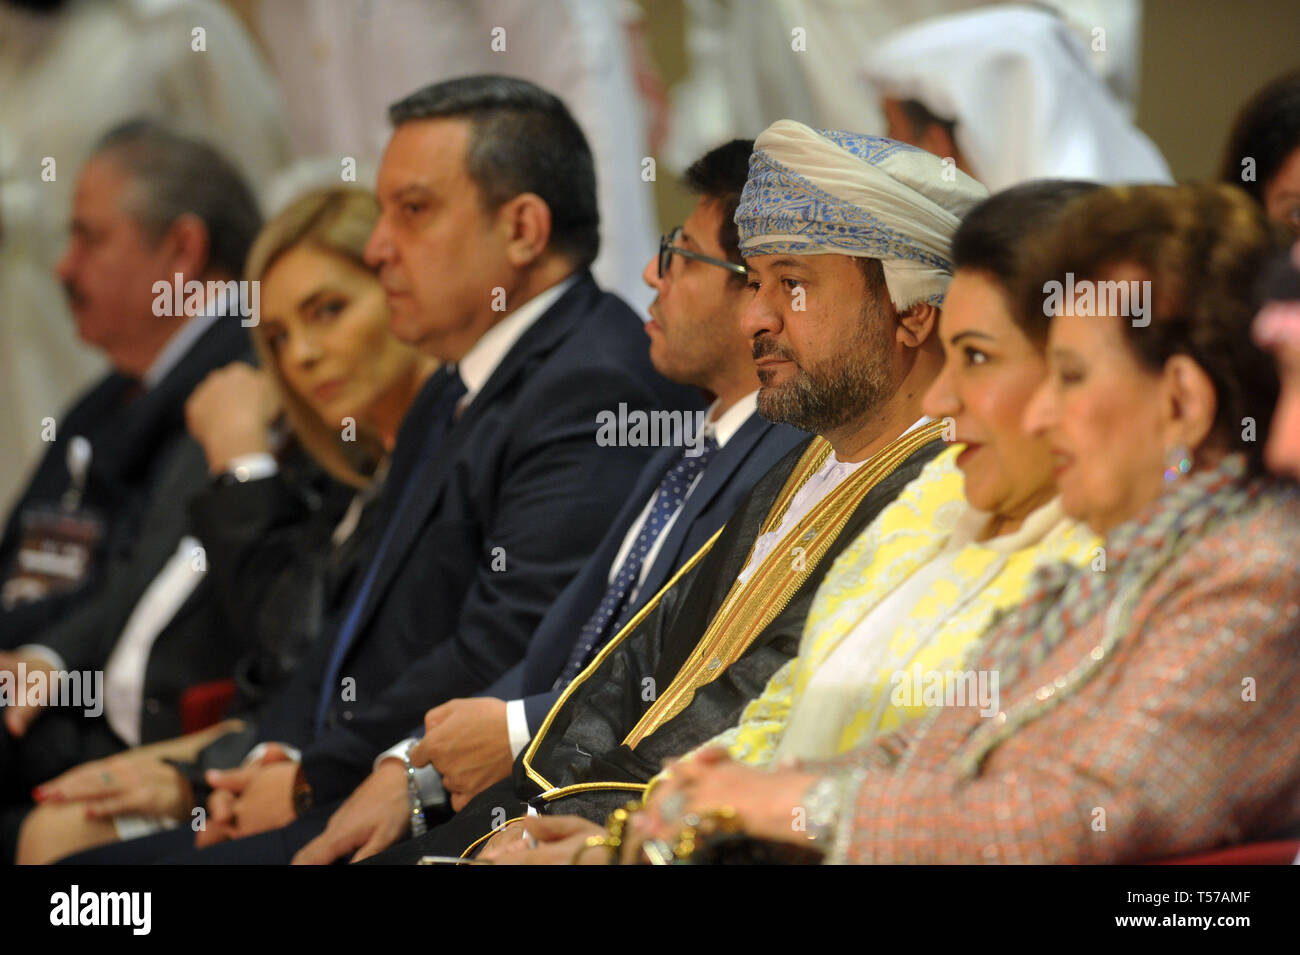 Kuwait City, Kuwait. 21st Apr, 2019. Participants attend the opening ceremony of the 16th Arab Media Forum in Kuwait City, Kuwait, on April 21, 2019. The two-day forum will discuss several topics including humanization of media, the reality and future of the Arab's media, the skill of dealing with social media and the language of dialogue. Credit: Asad/Xinhua/Alamy Live News Stock Photo